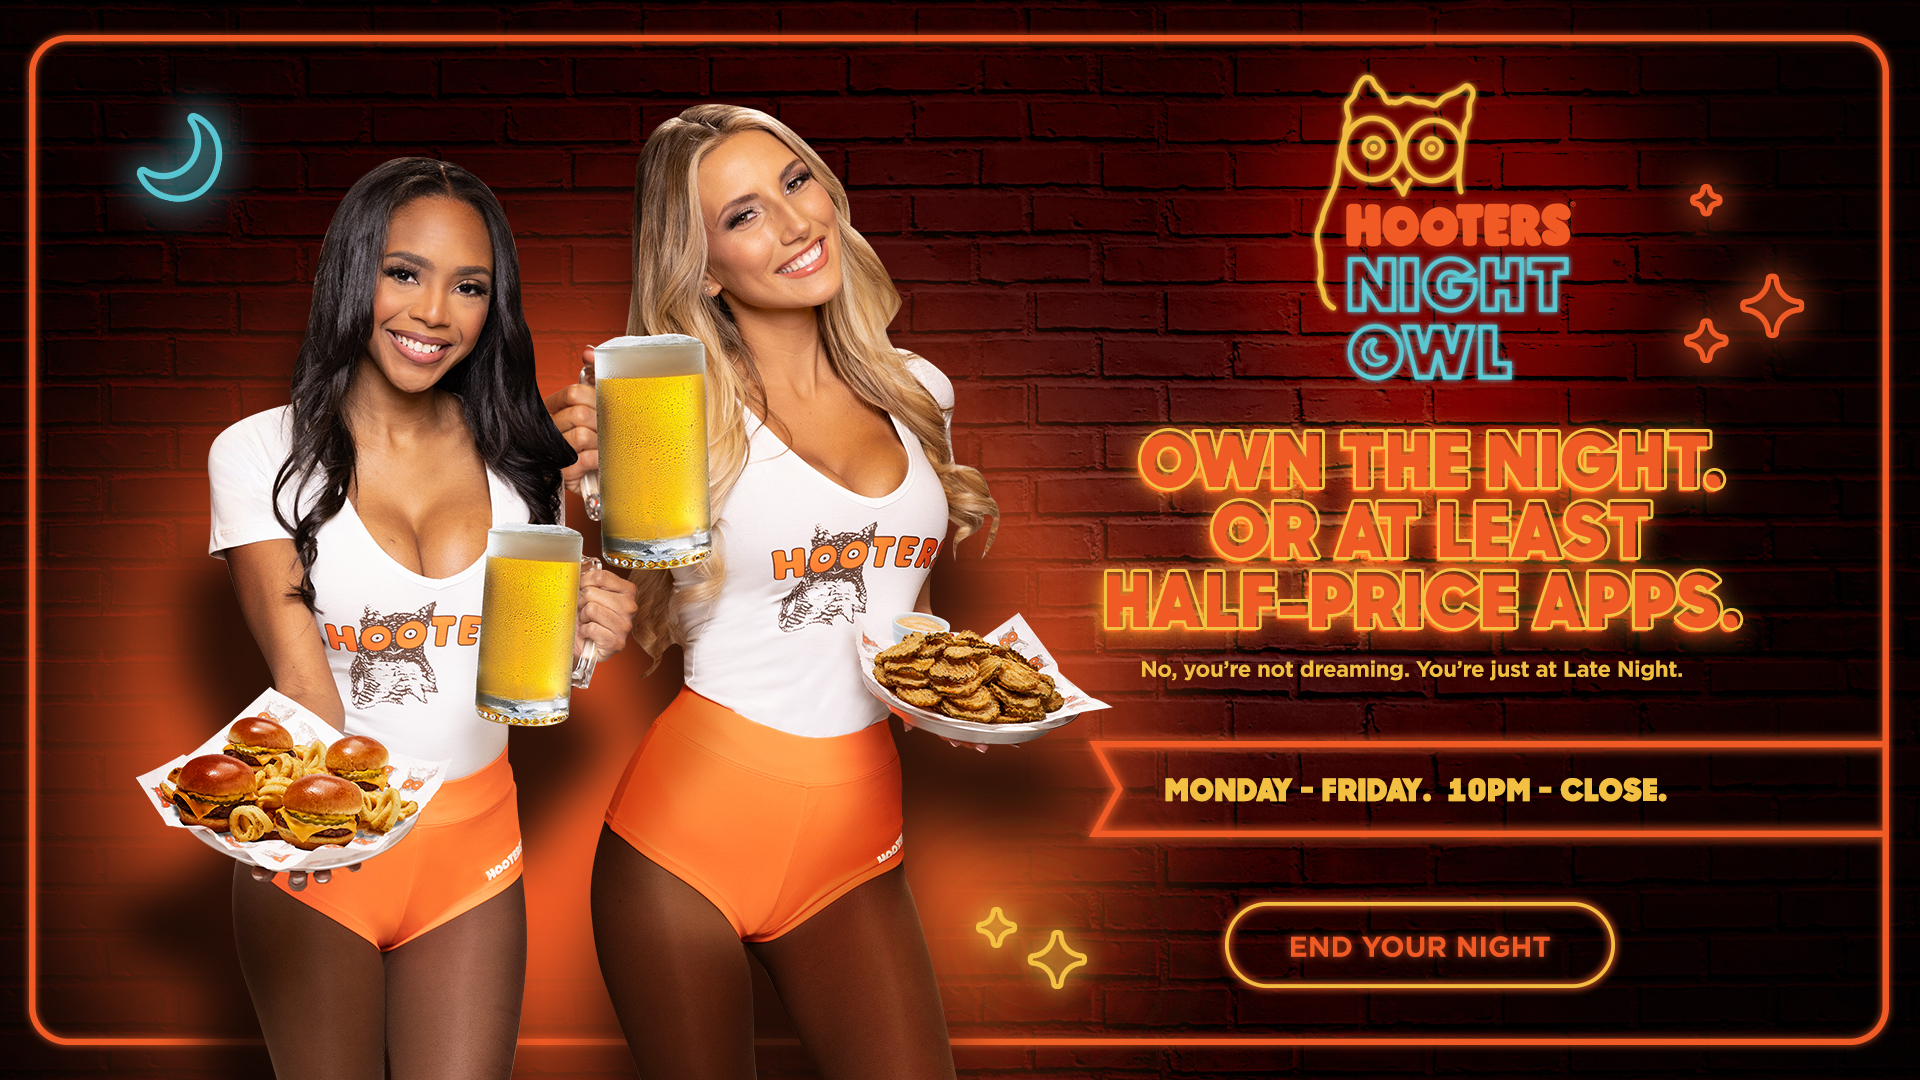 Hooters Night Owl. Own the night. Or at least half-price apps.